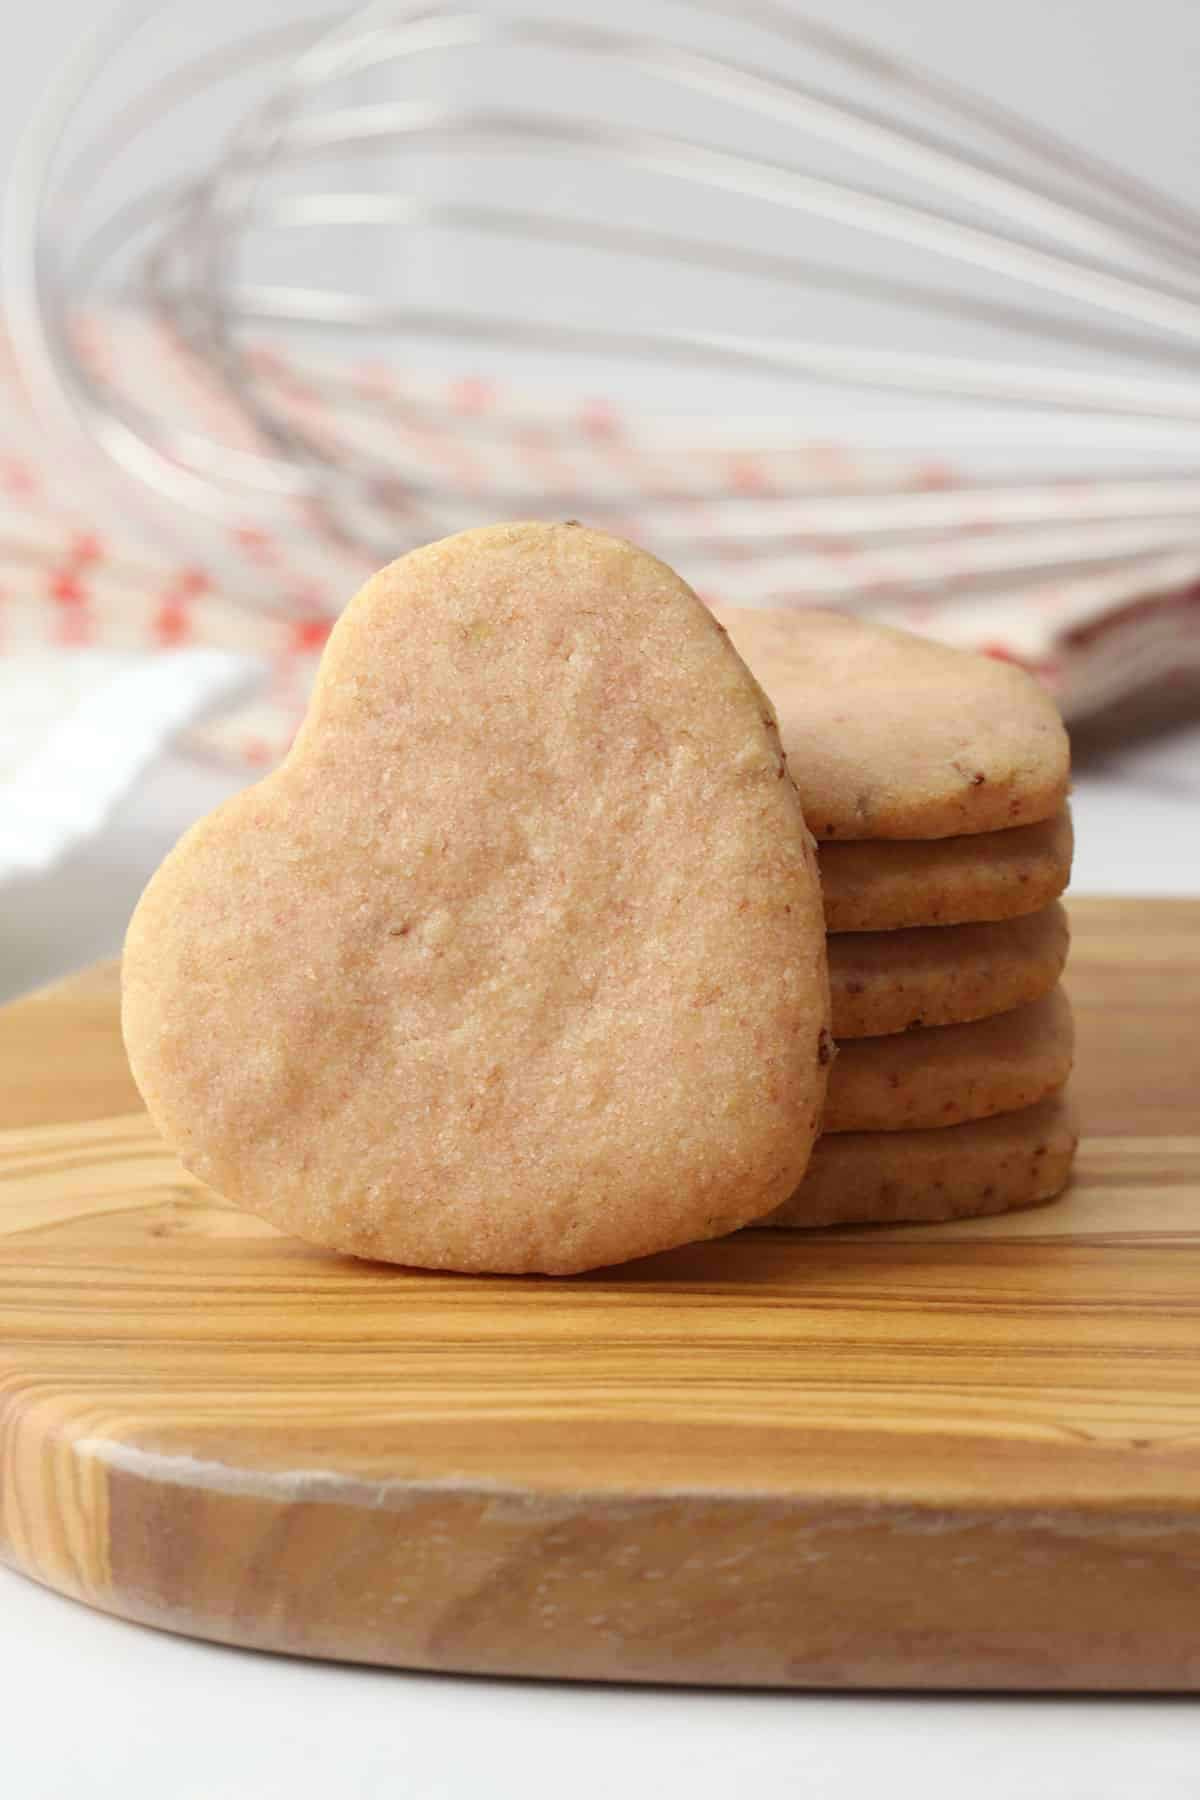 Heart shaped cookie propped up on a stack of more cookies.